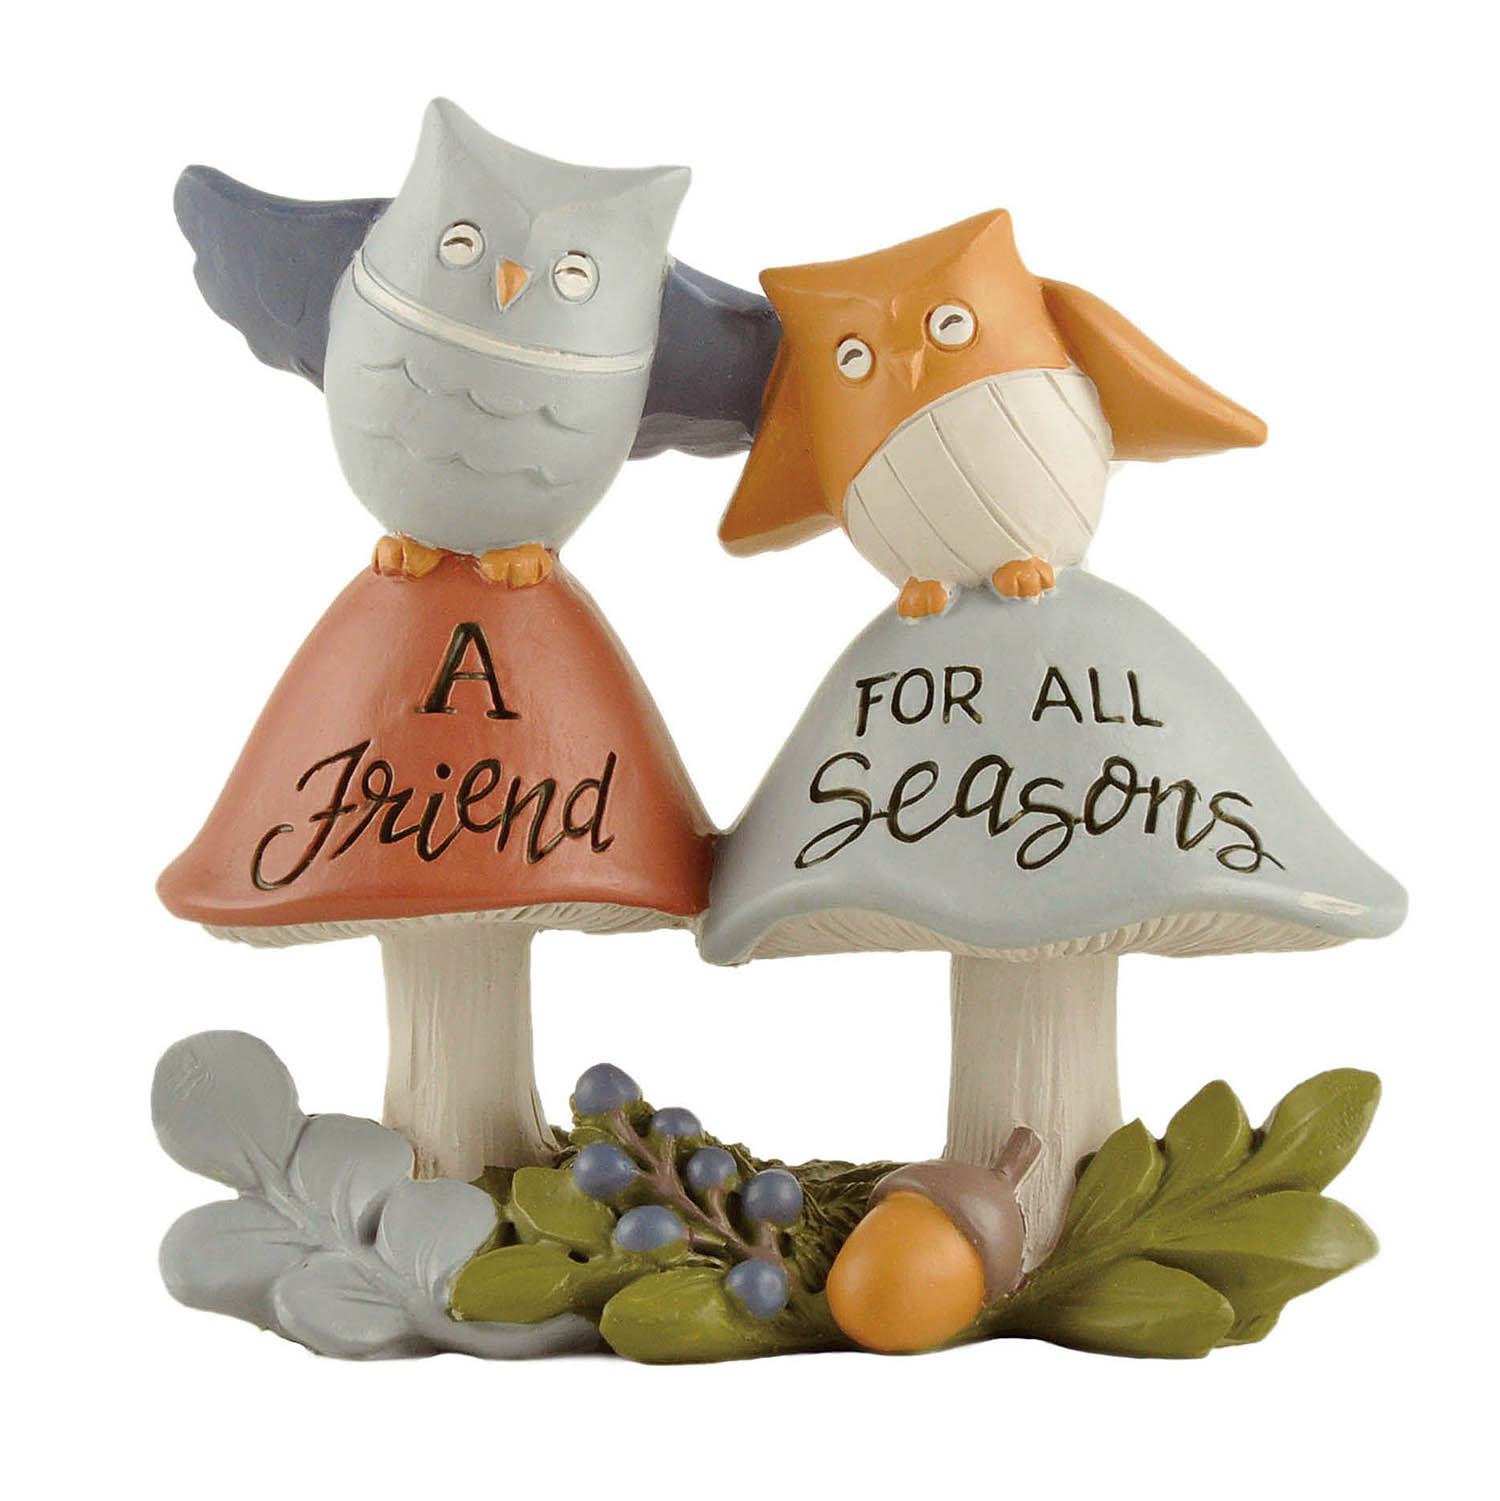 Whimsical Friendship-Themed Decor - 'A Friend for All Seasons' Dual Owl Resin Figurine, Perfect for Bookshelf or Mantel Display236-13846-1